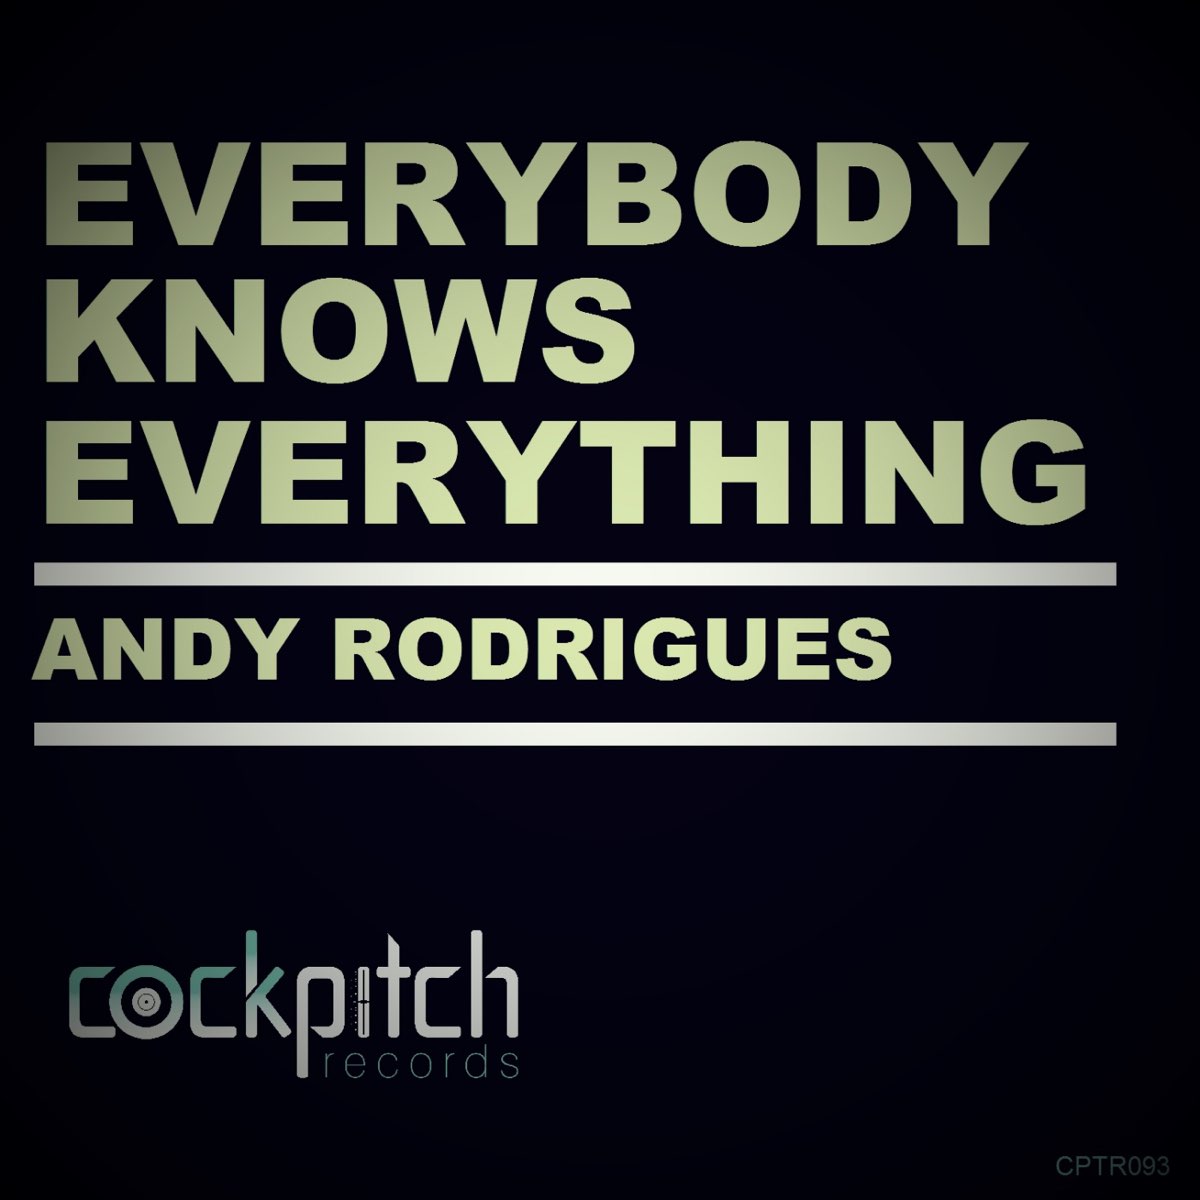 She knows everything. Andy Rodrigues. Everybody knows.